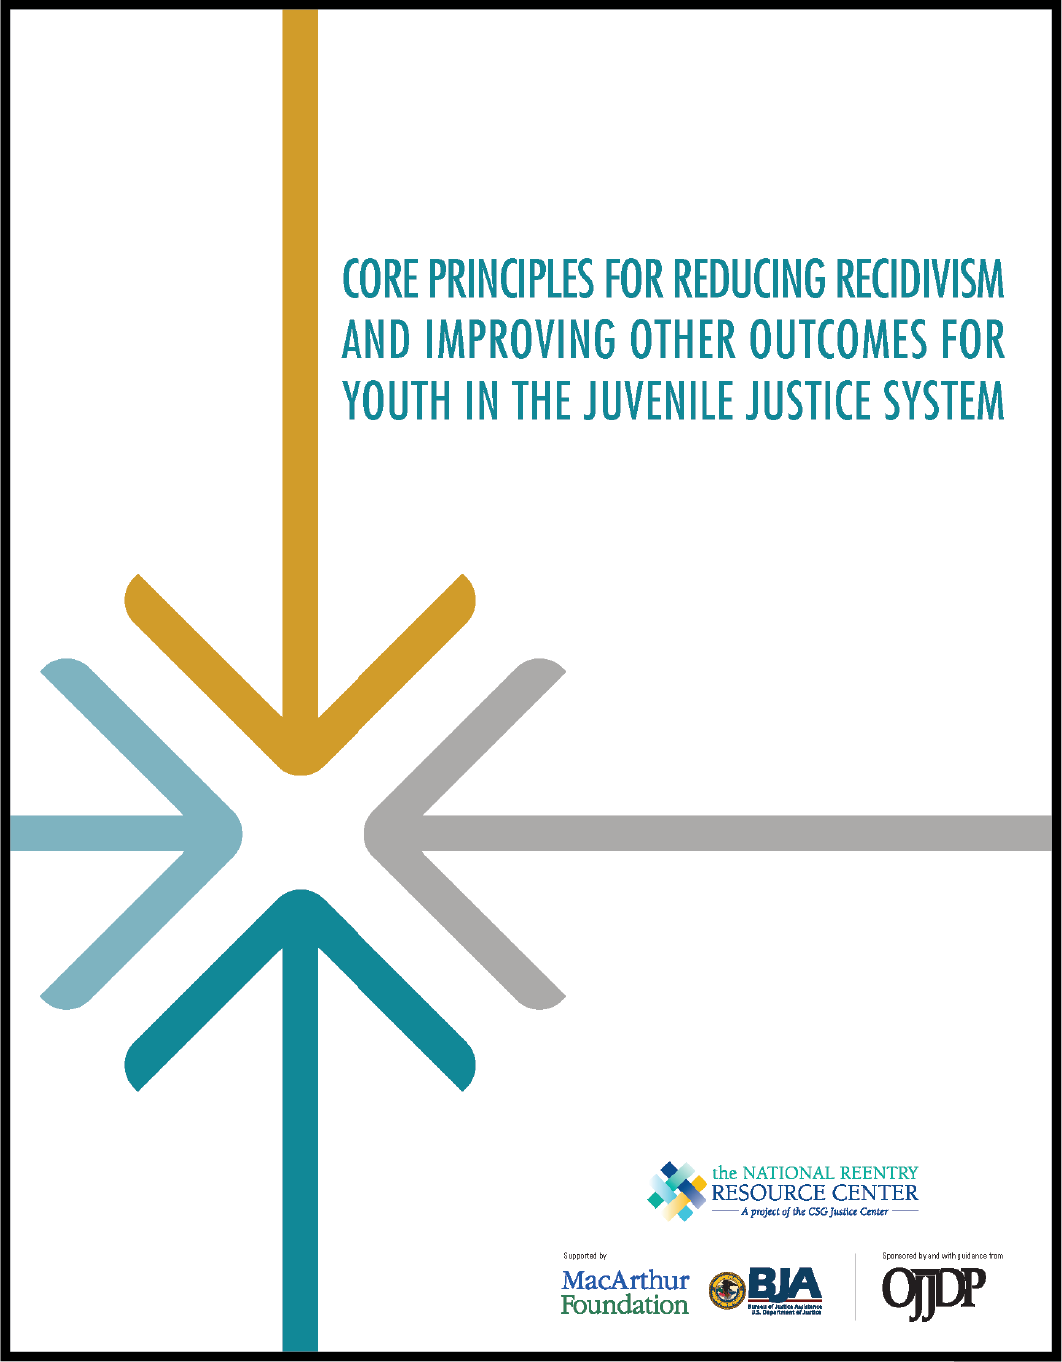 Cover of report, "Core Principles for Reducing Recidivism and Improving Other Outcomes for Youth in the Juvenile Justice System"